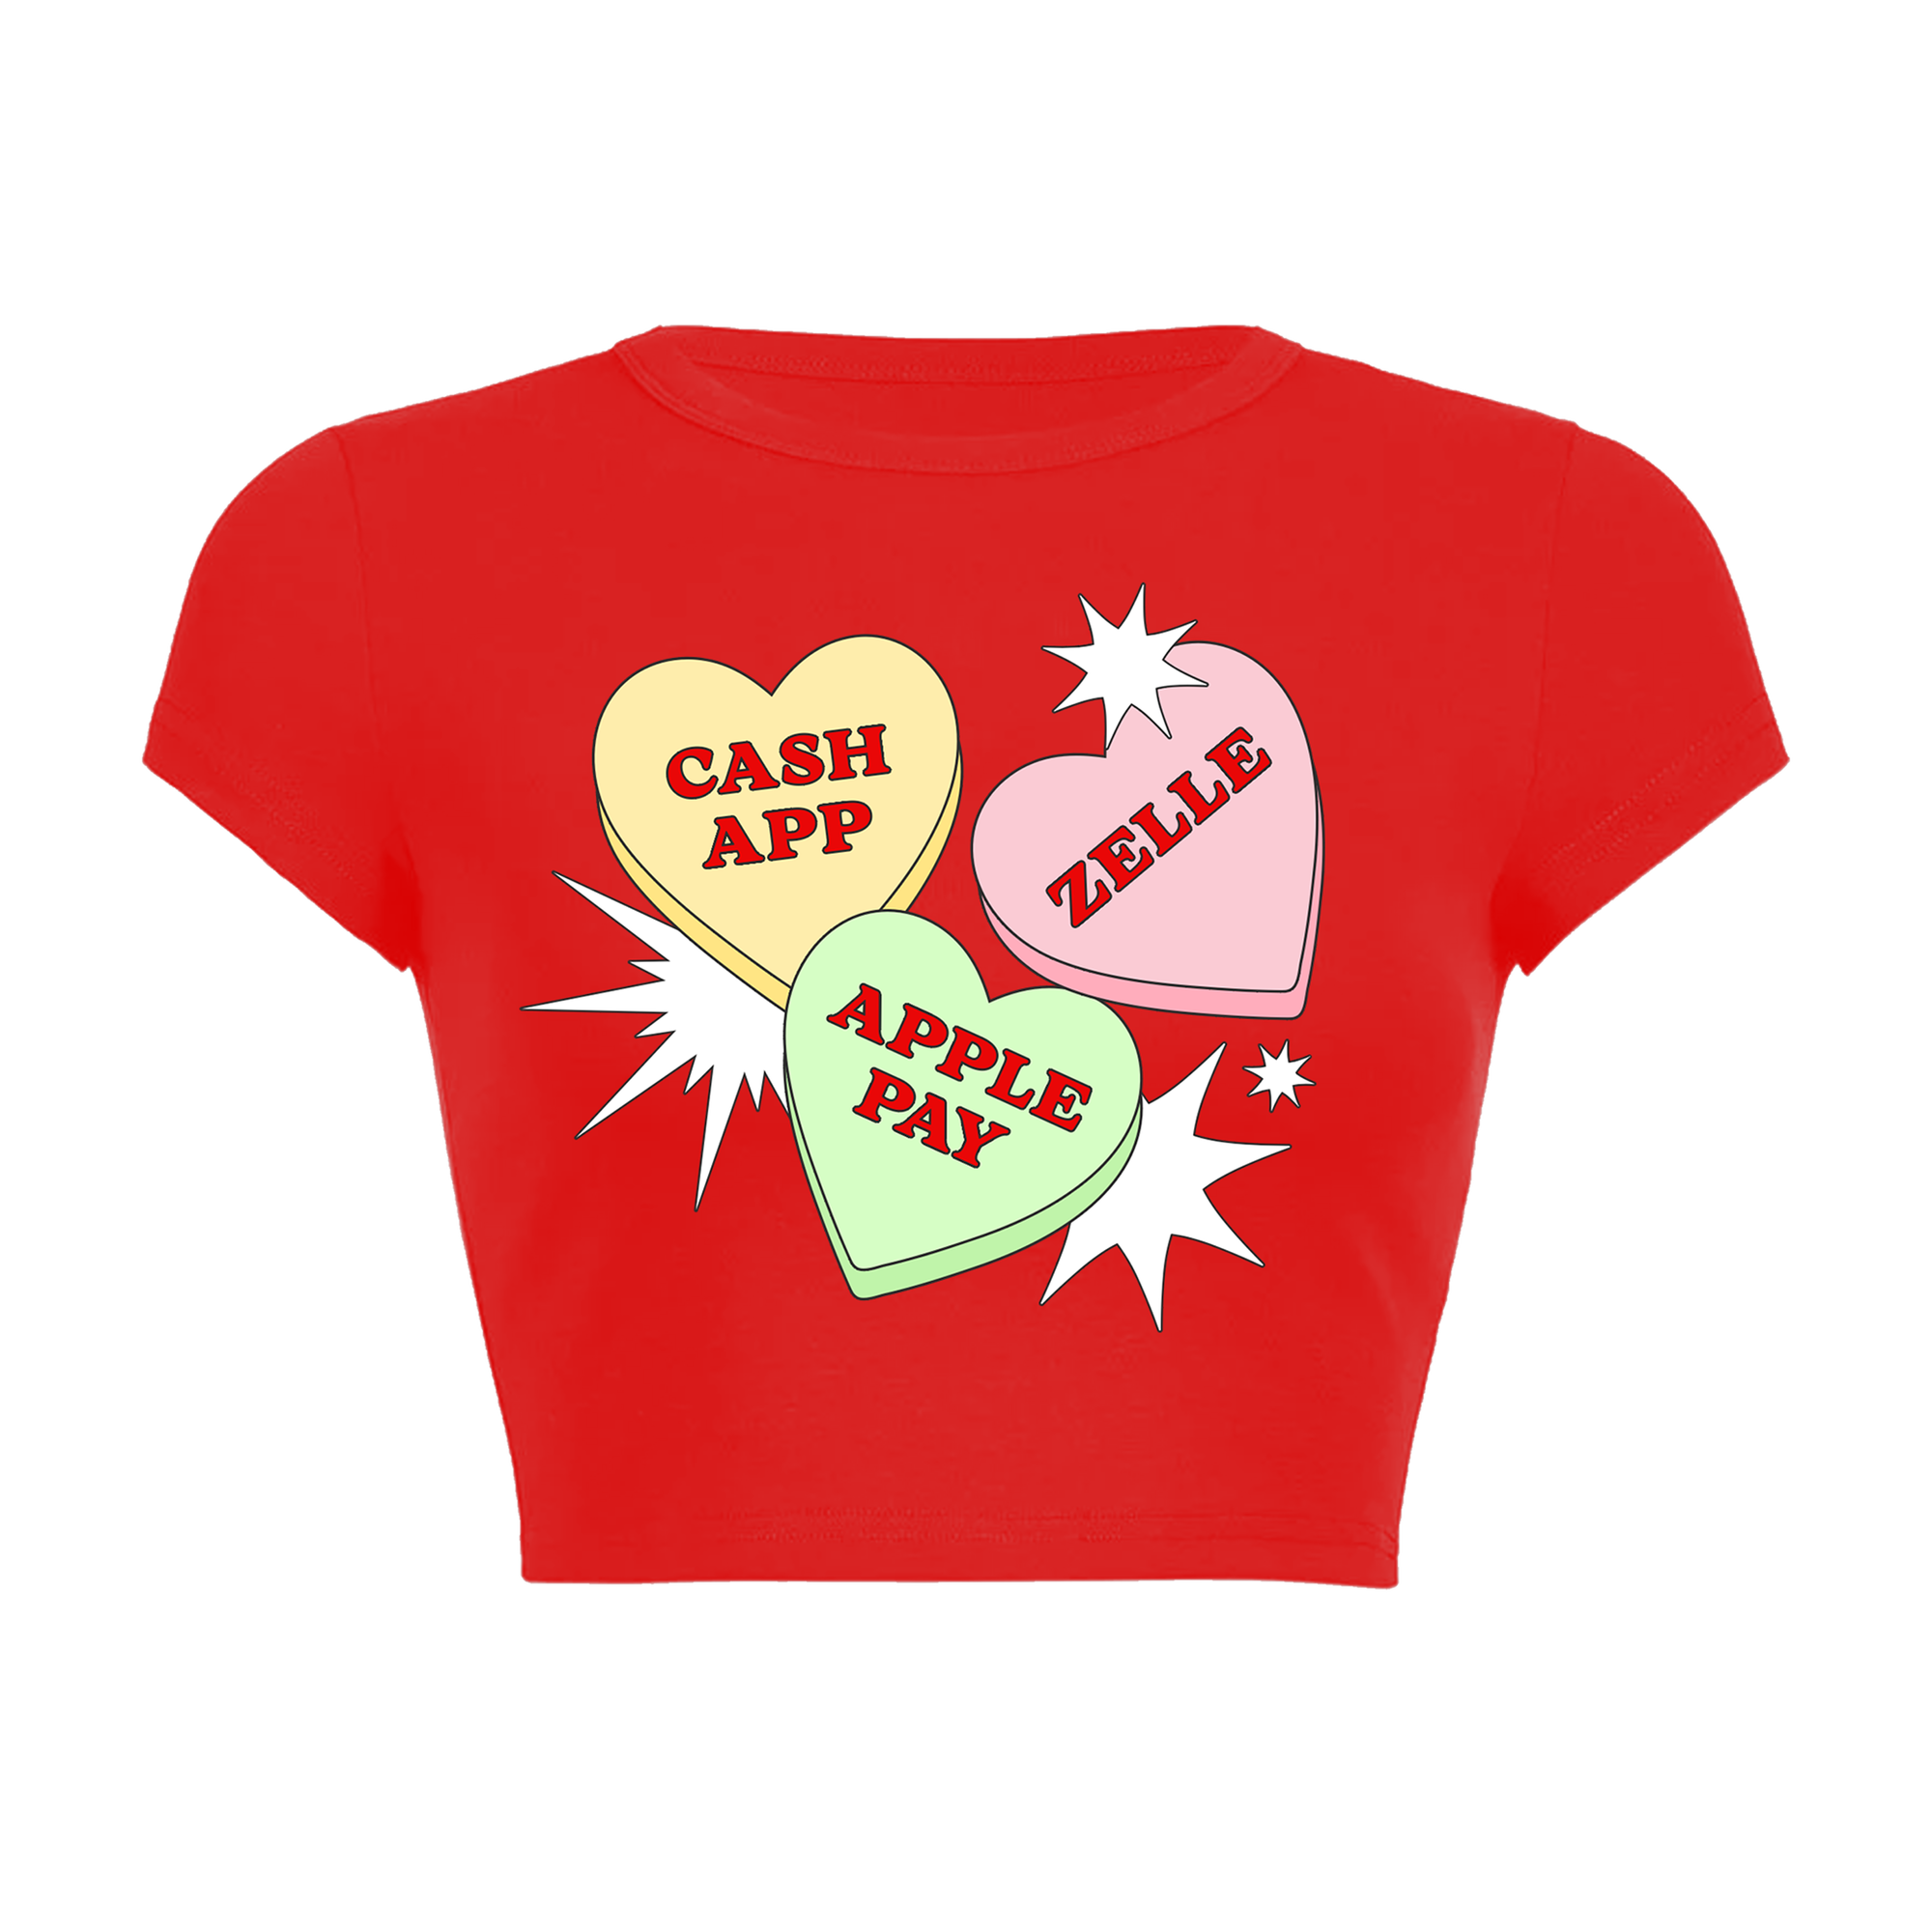 SAFE FUN VDAY BABY TEE - RED